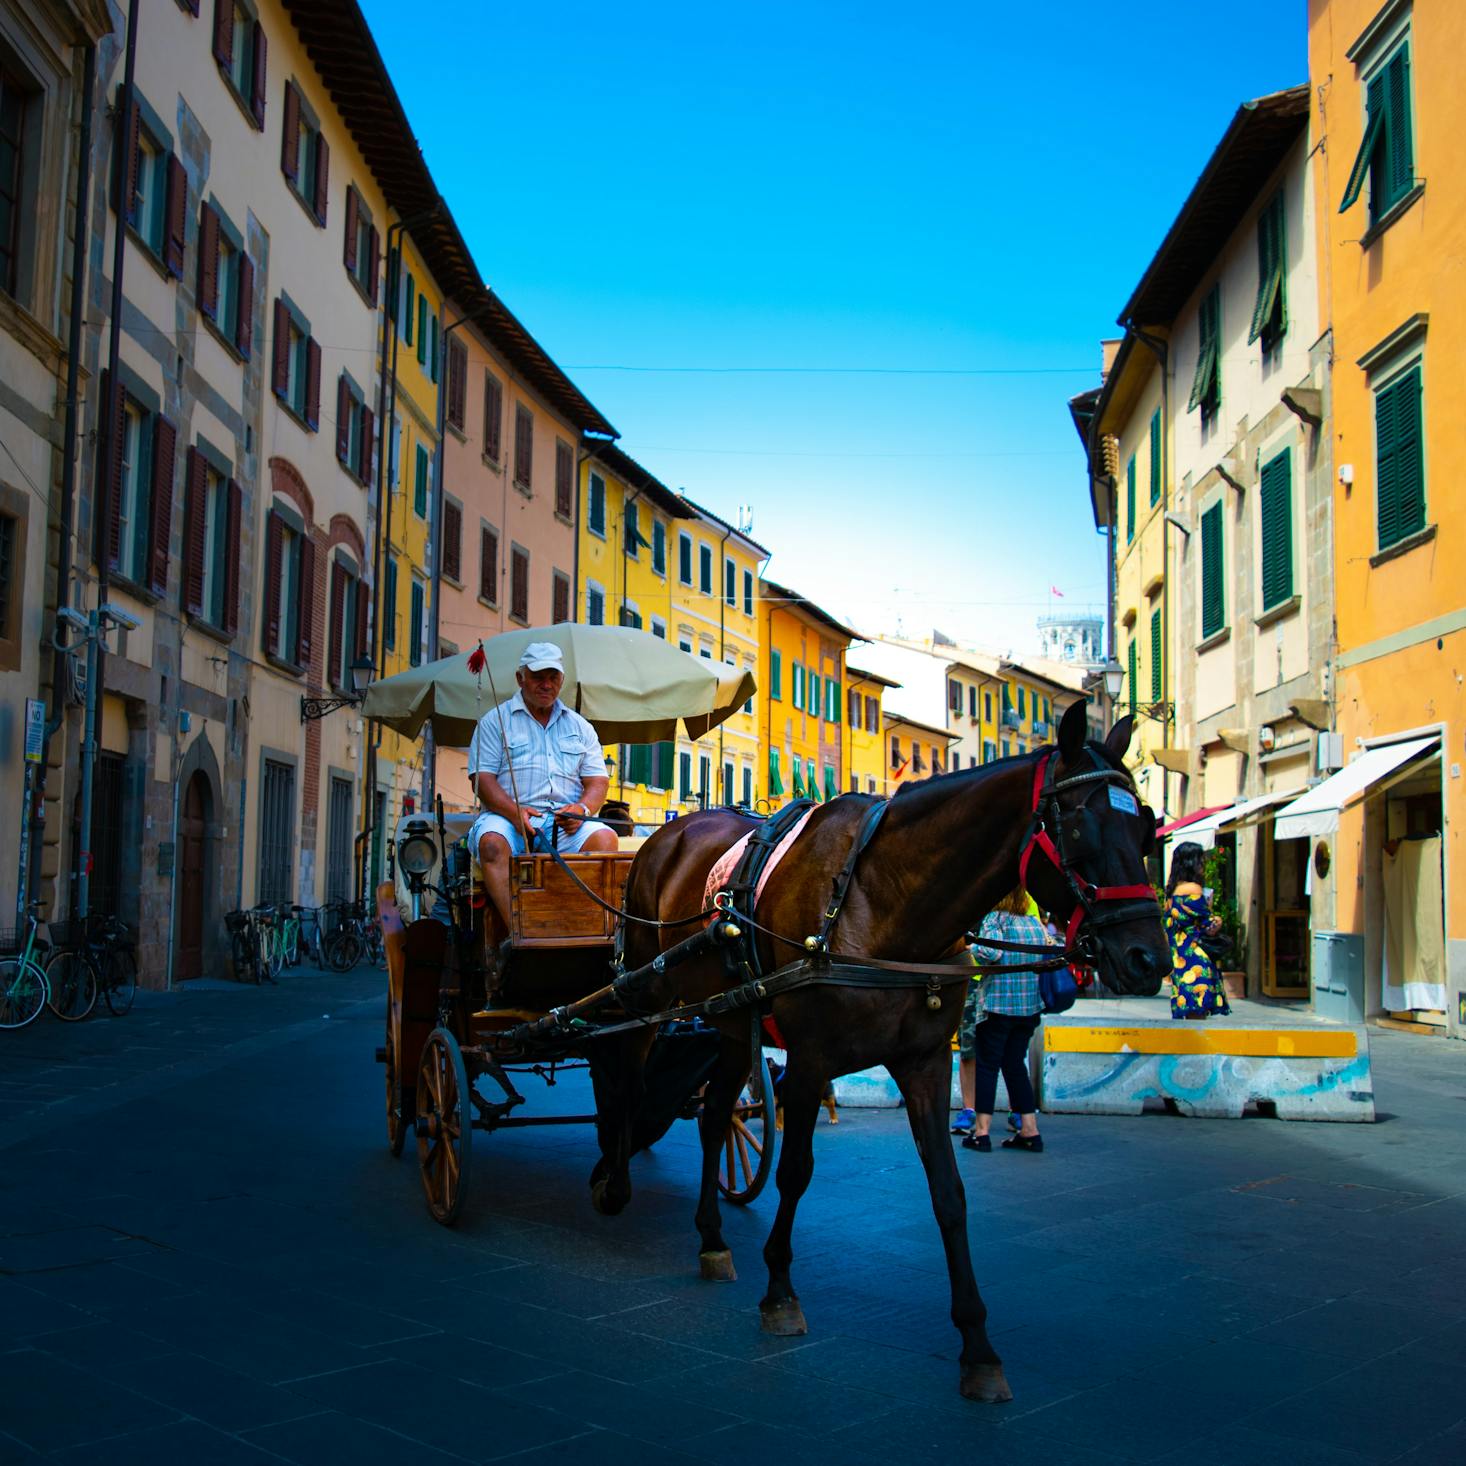 Horse-drawn carriage in Pisa, Italy